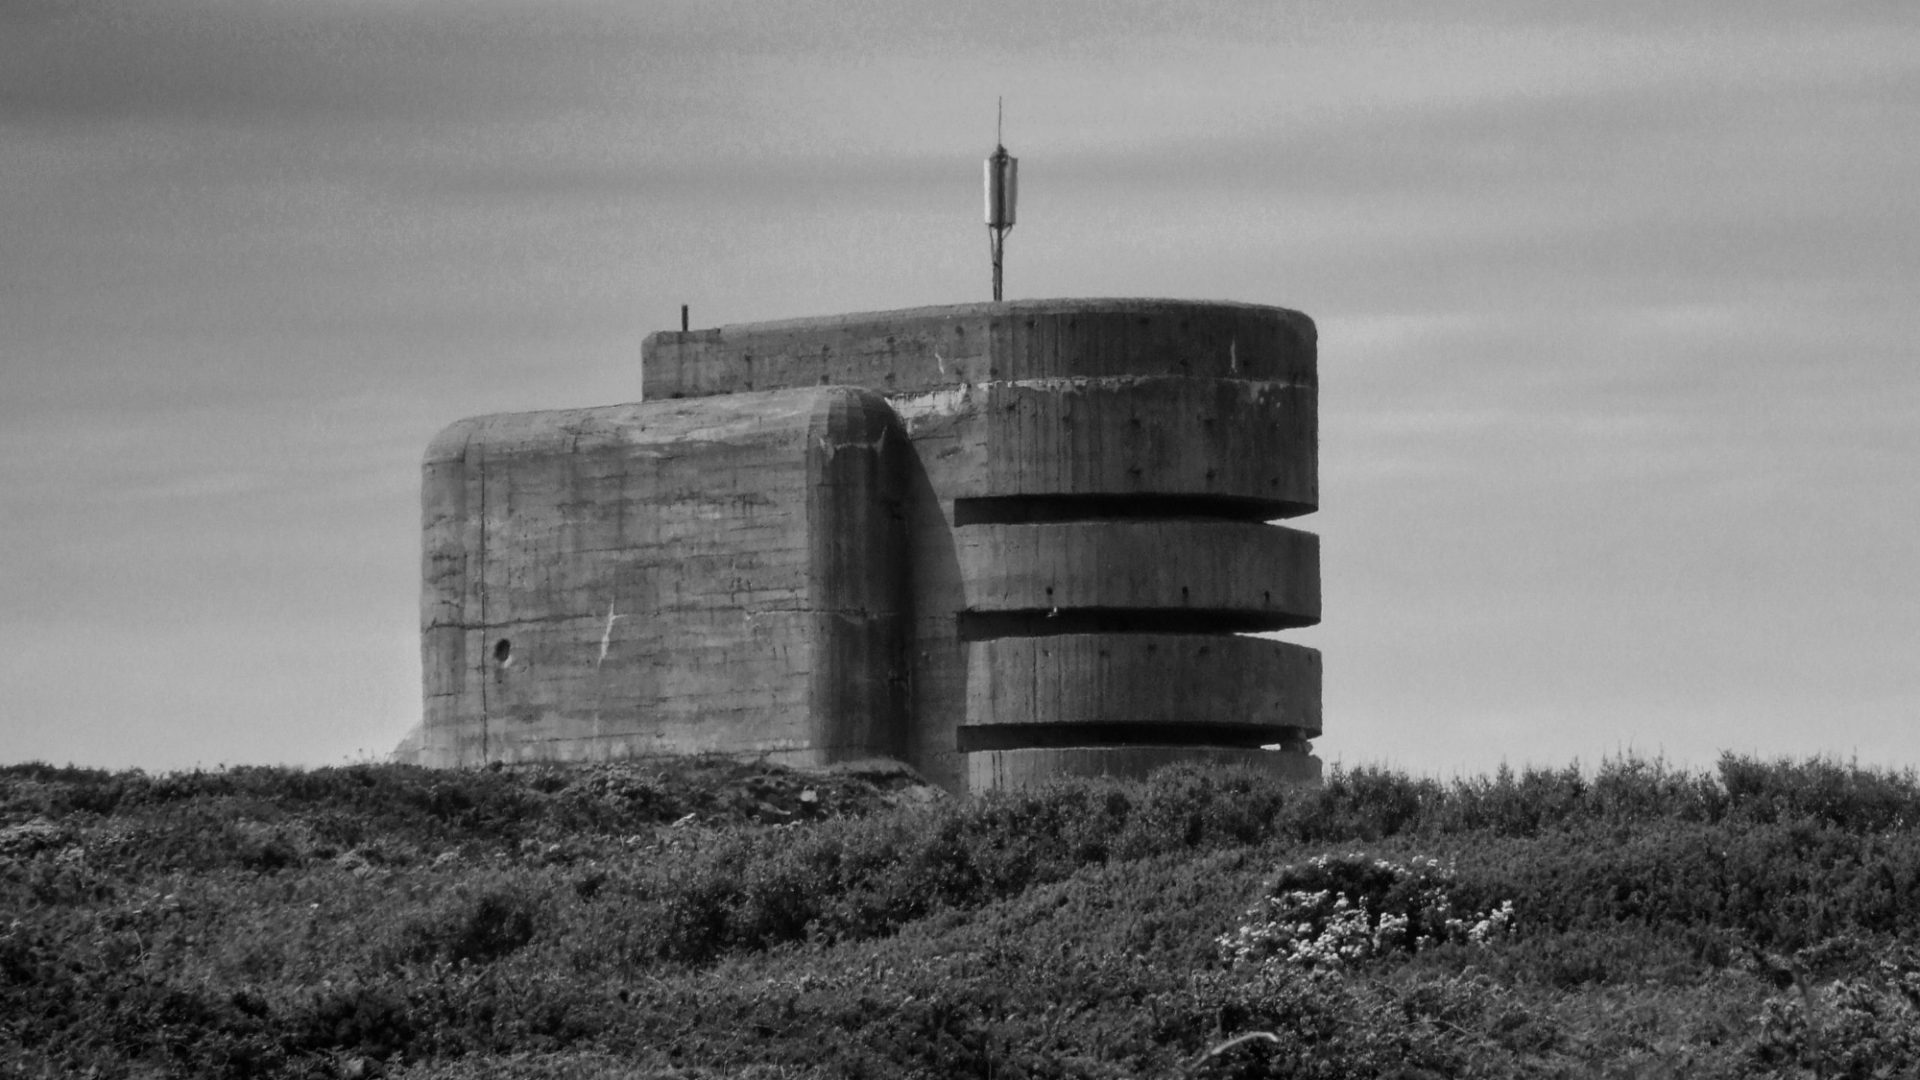 Prisoners on Alderney were forced to build a network of fortifications as part of Hitler’s ‘Atlantic wall’. Photo: David Woollatt/Getty